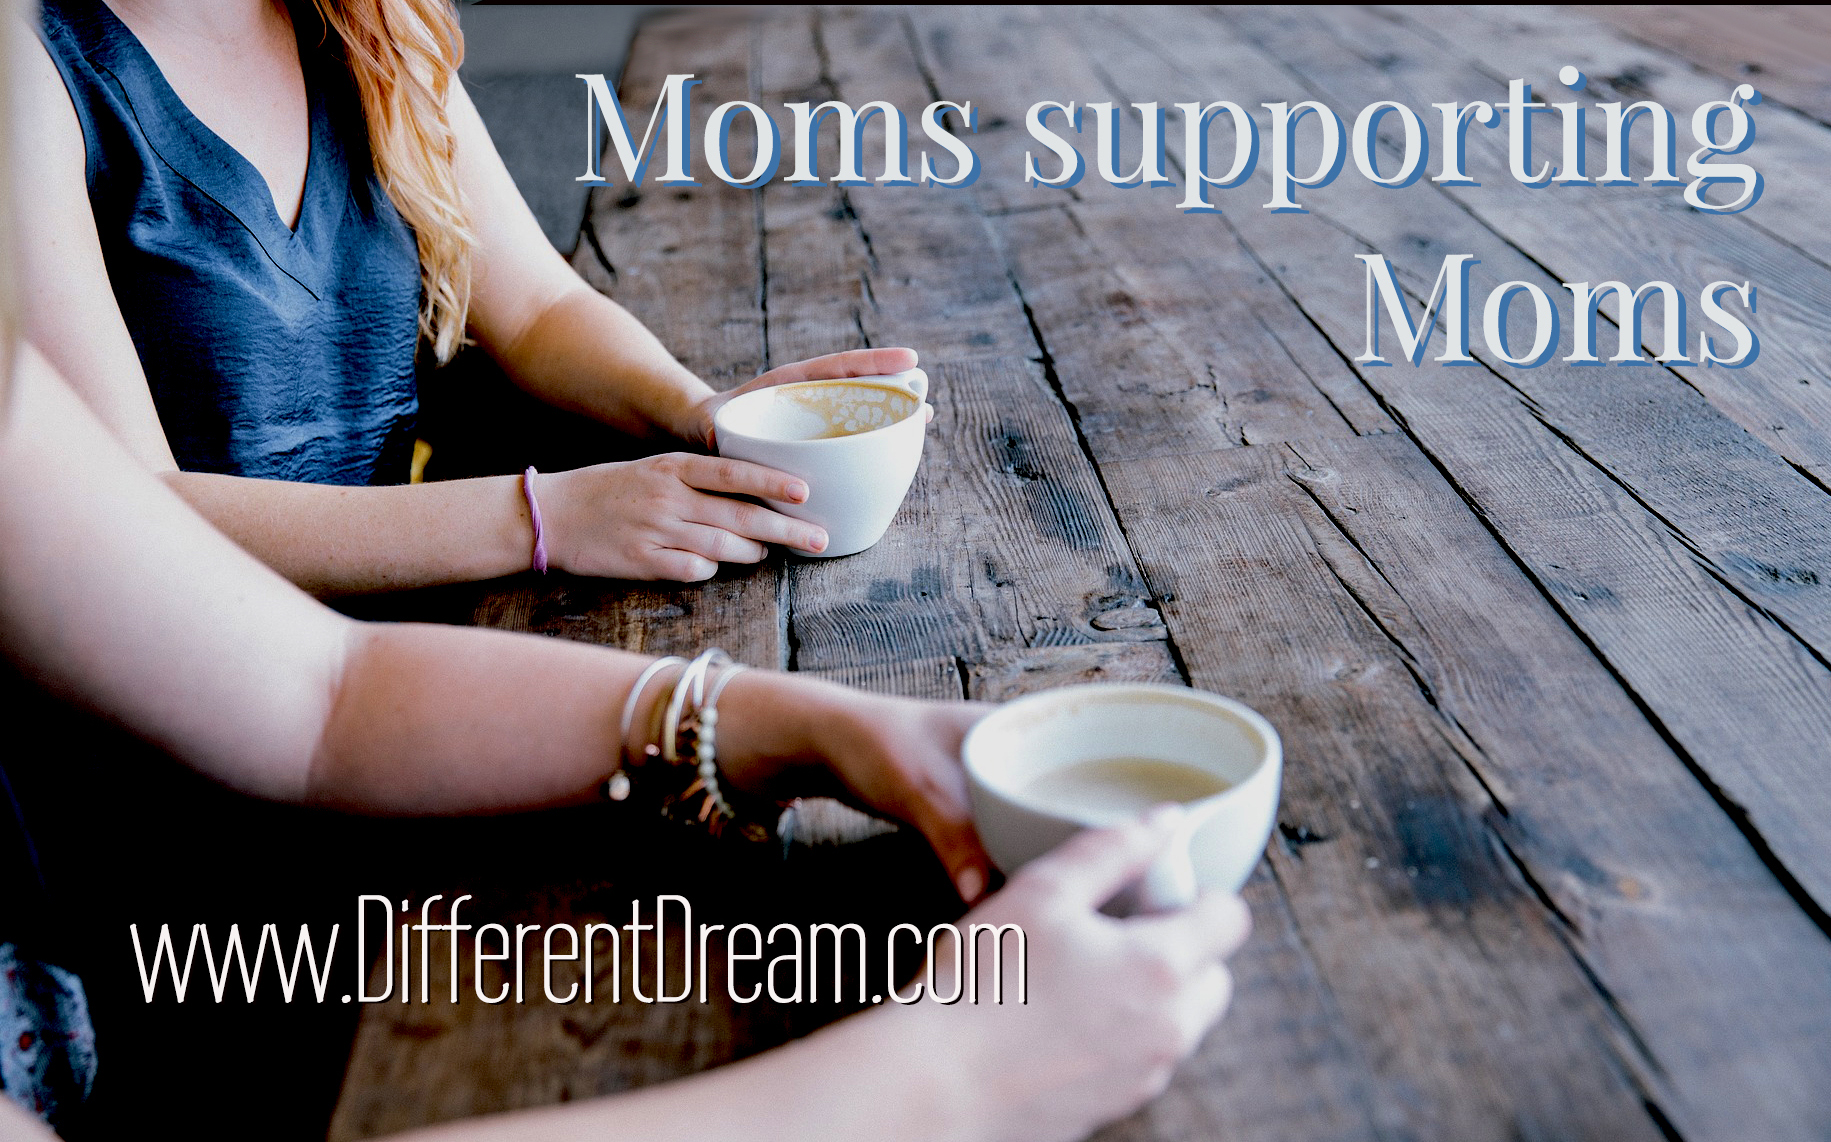 Guest blogger Heather Braucher explains how caregiving moms and support and encourage each other along the journey.